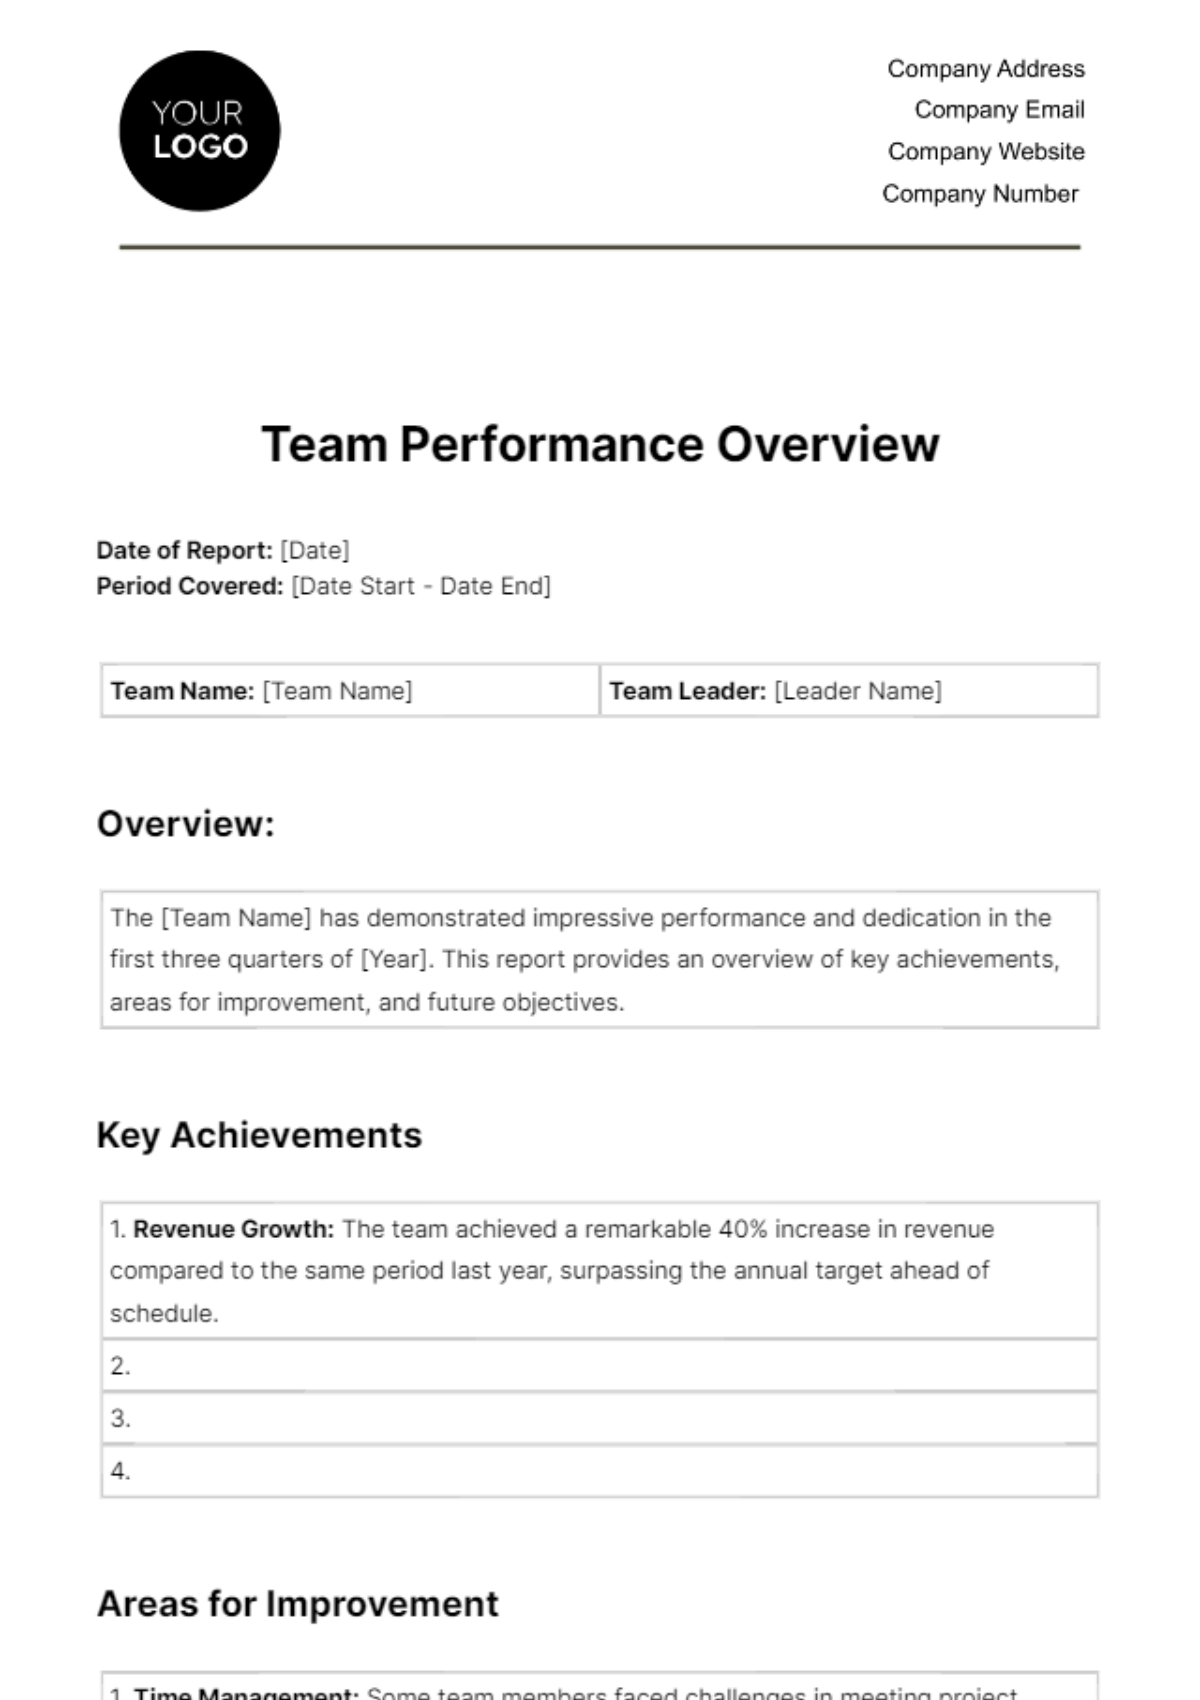 Free Team Performance Overview HR Template